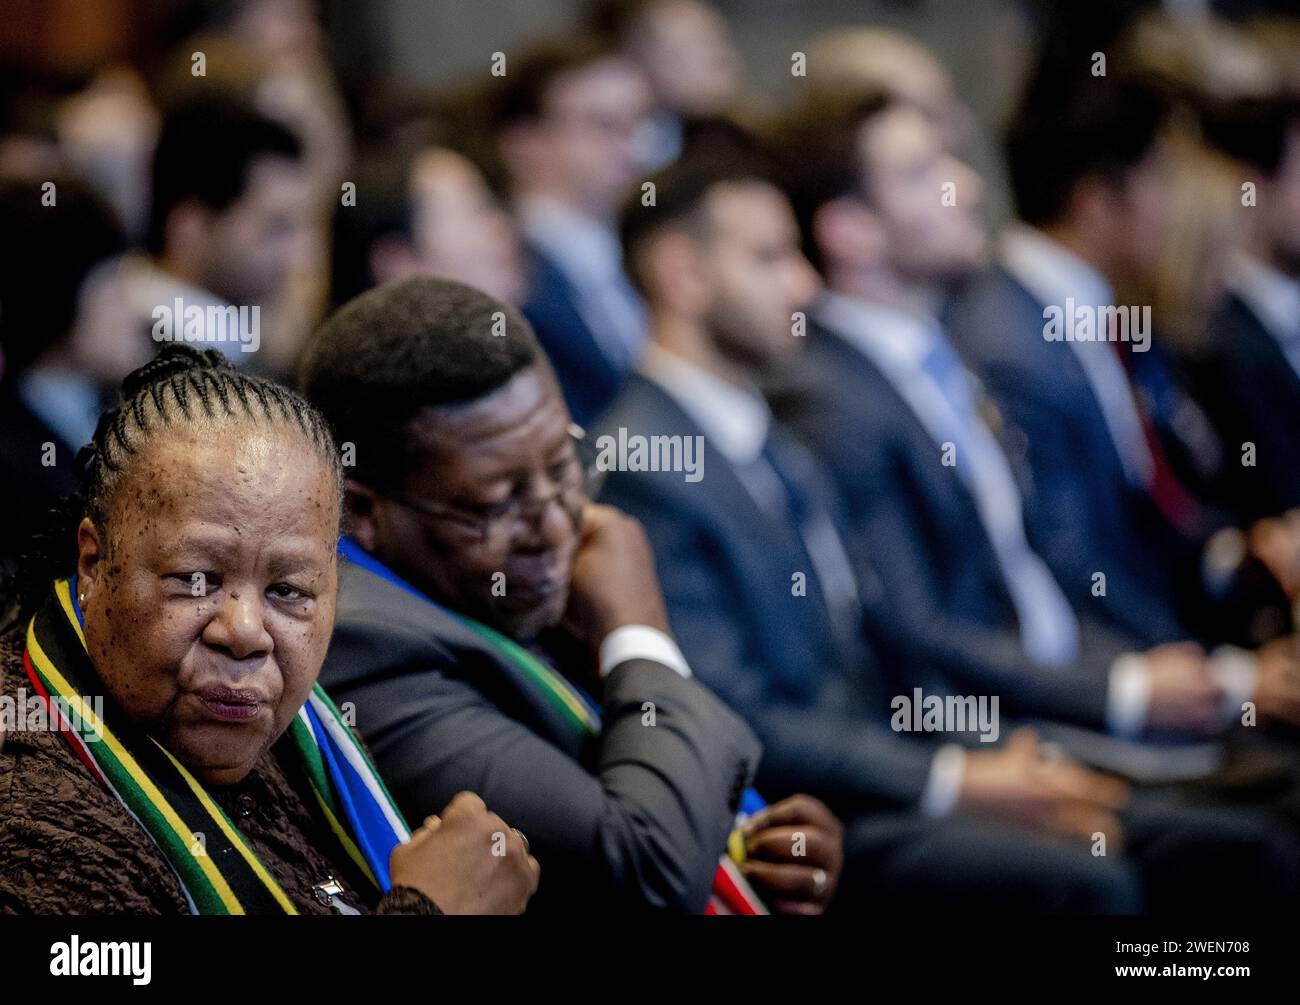 THE HAGUE - South African Foreign Minister Naledi Pandor during a ruling by the International Court of Justice (ICJ) on a request from South Africa for emergency measures for Gaza. Earlier this month, the court heard the genocide case against Israel, brought by South Africa. The entire case can take years to complete. ANP REMKO DE WAAL netherlands out - belgium out Stock Photo